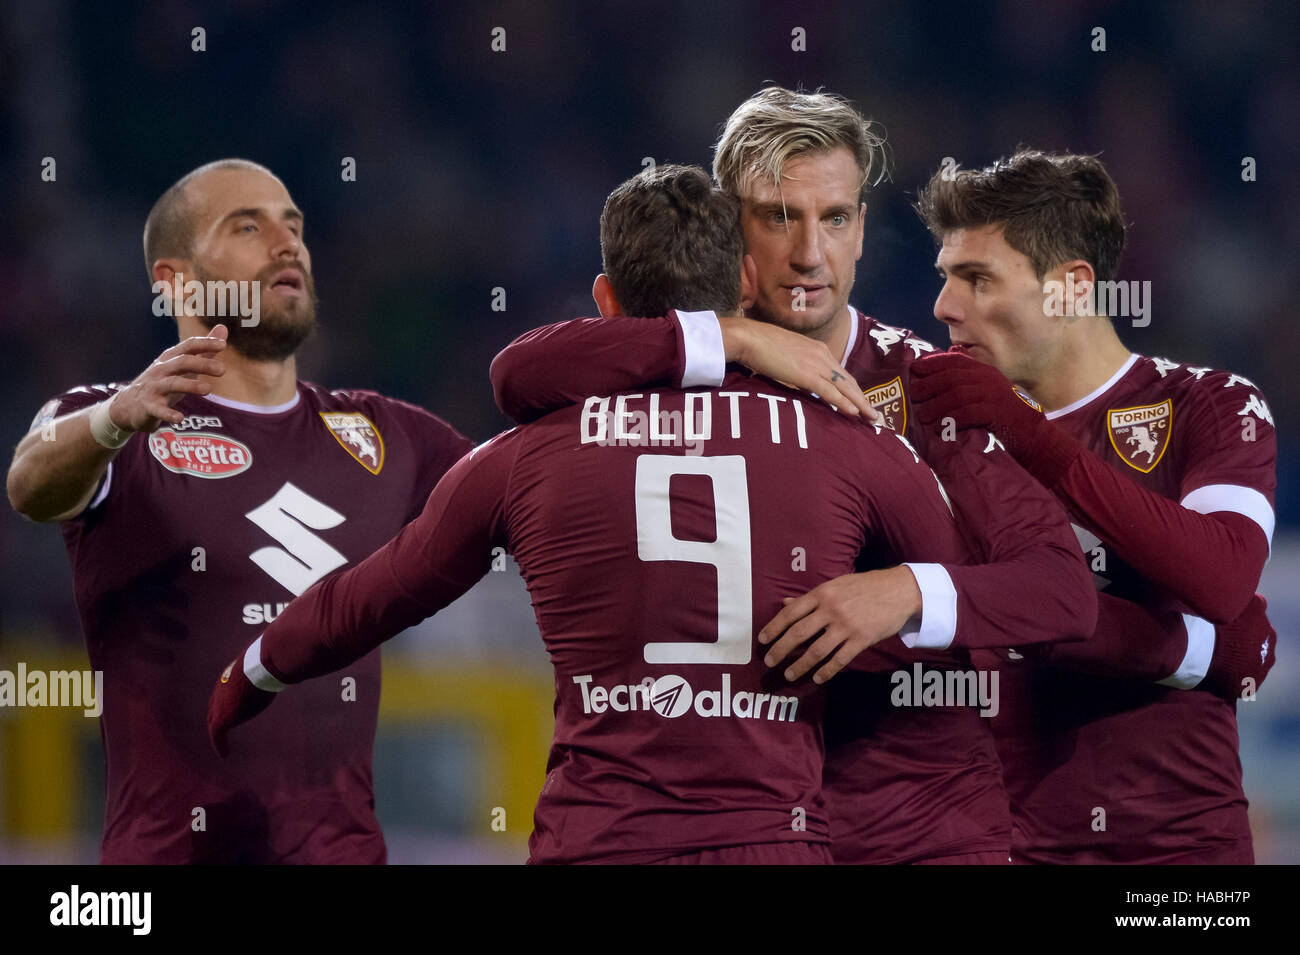 Turin, Italy. 29th November, 2016: Maxi Lopez of Torino FC celebrates with his team mates after scoring a goal during the TIM Cup football match between Torino FC and AC Pisa. Credit:  Nicolò Campo/Alamy Live News Stock Photo